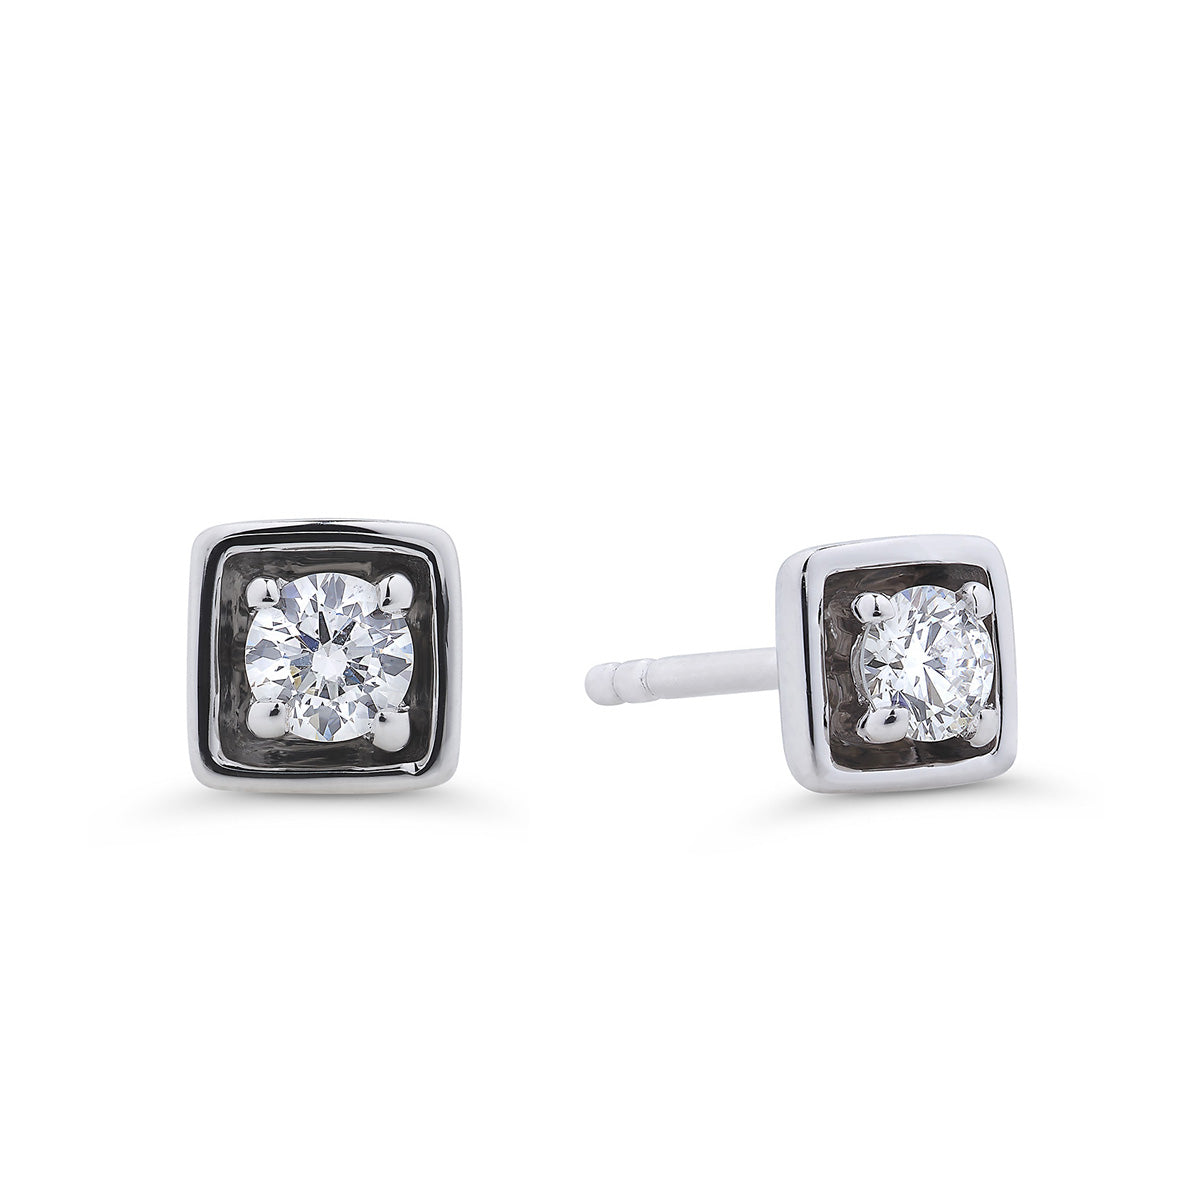 Edgy Diamond Studs in Sterling Sliver